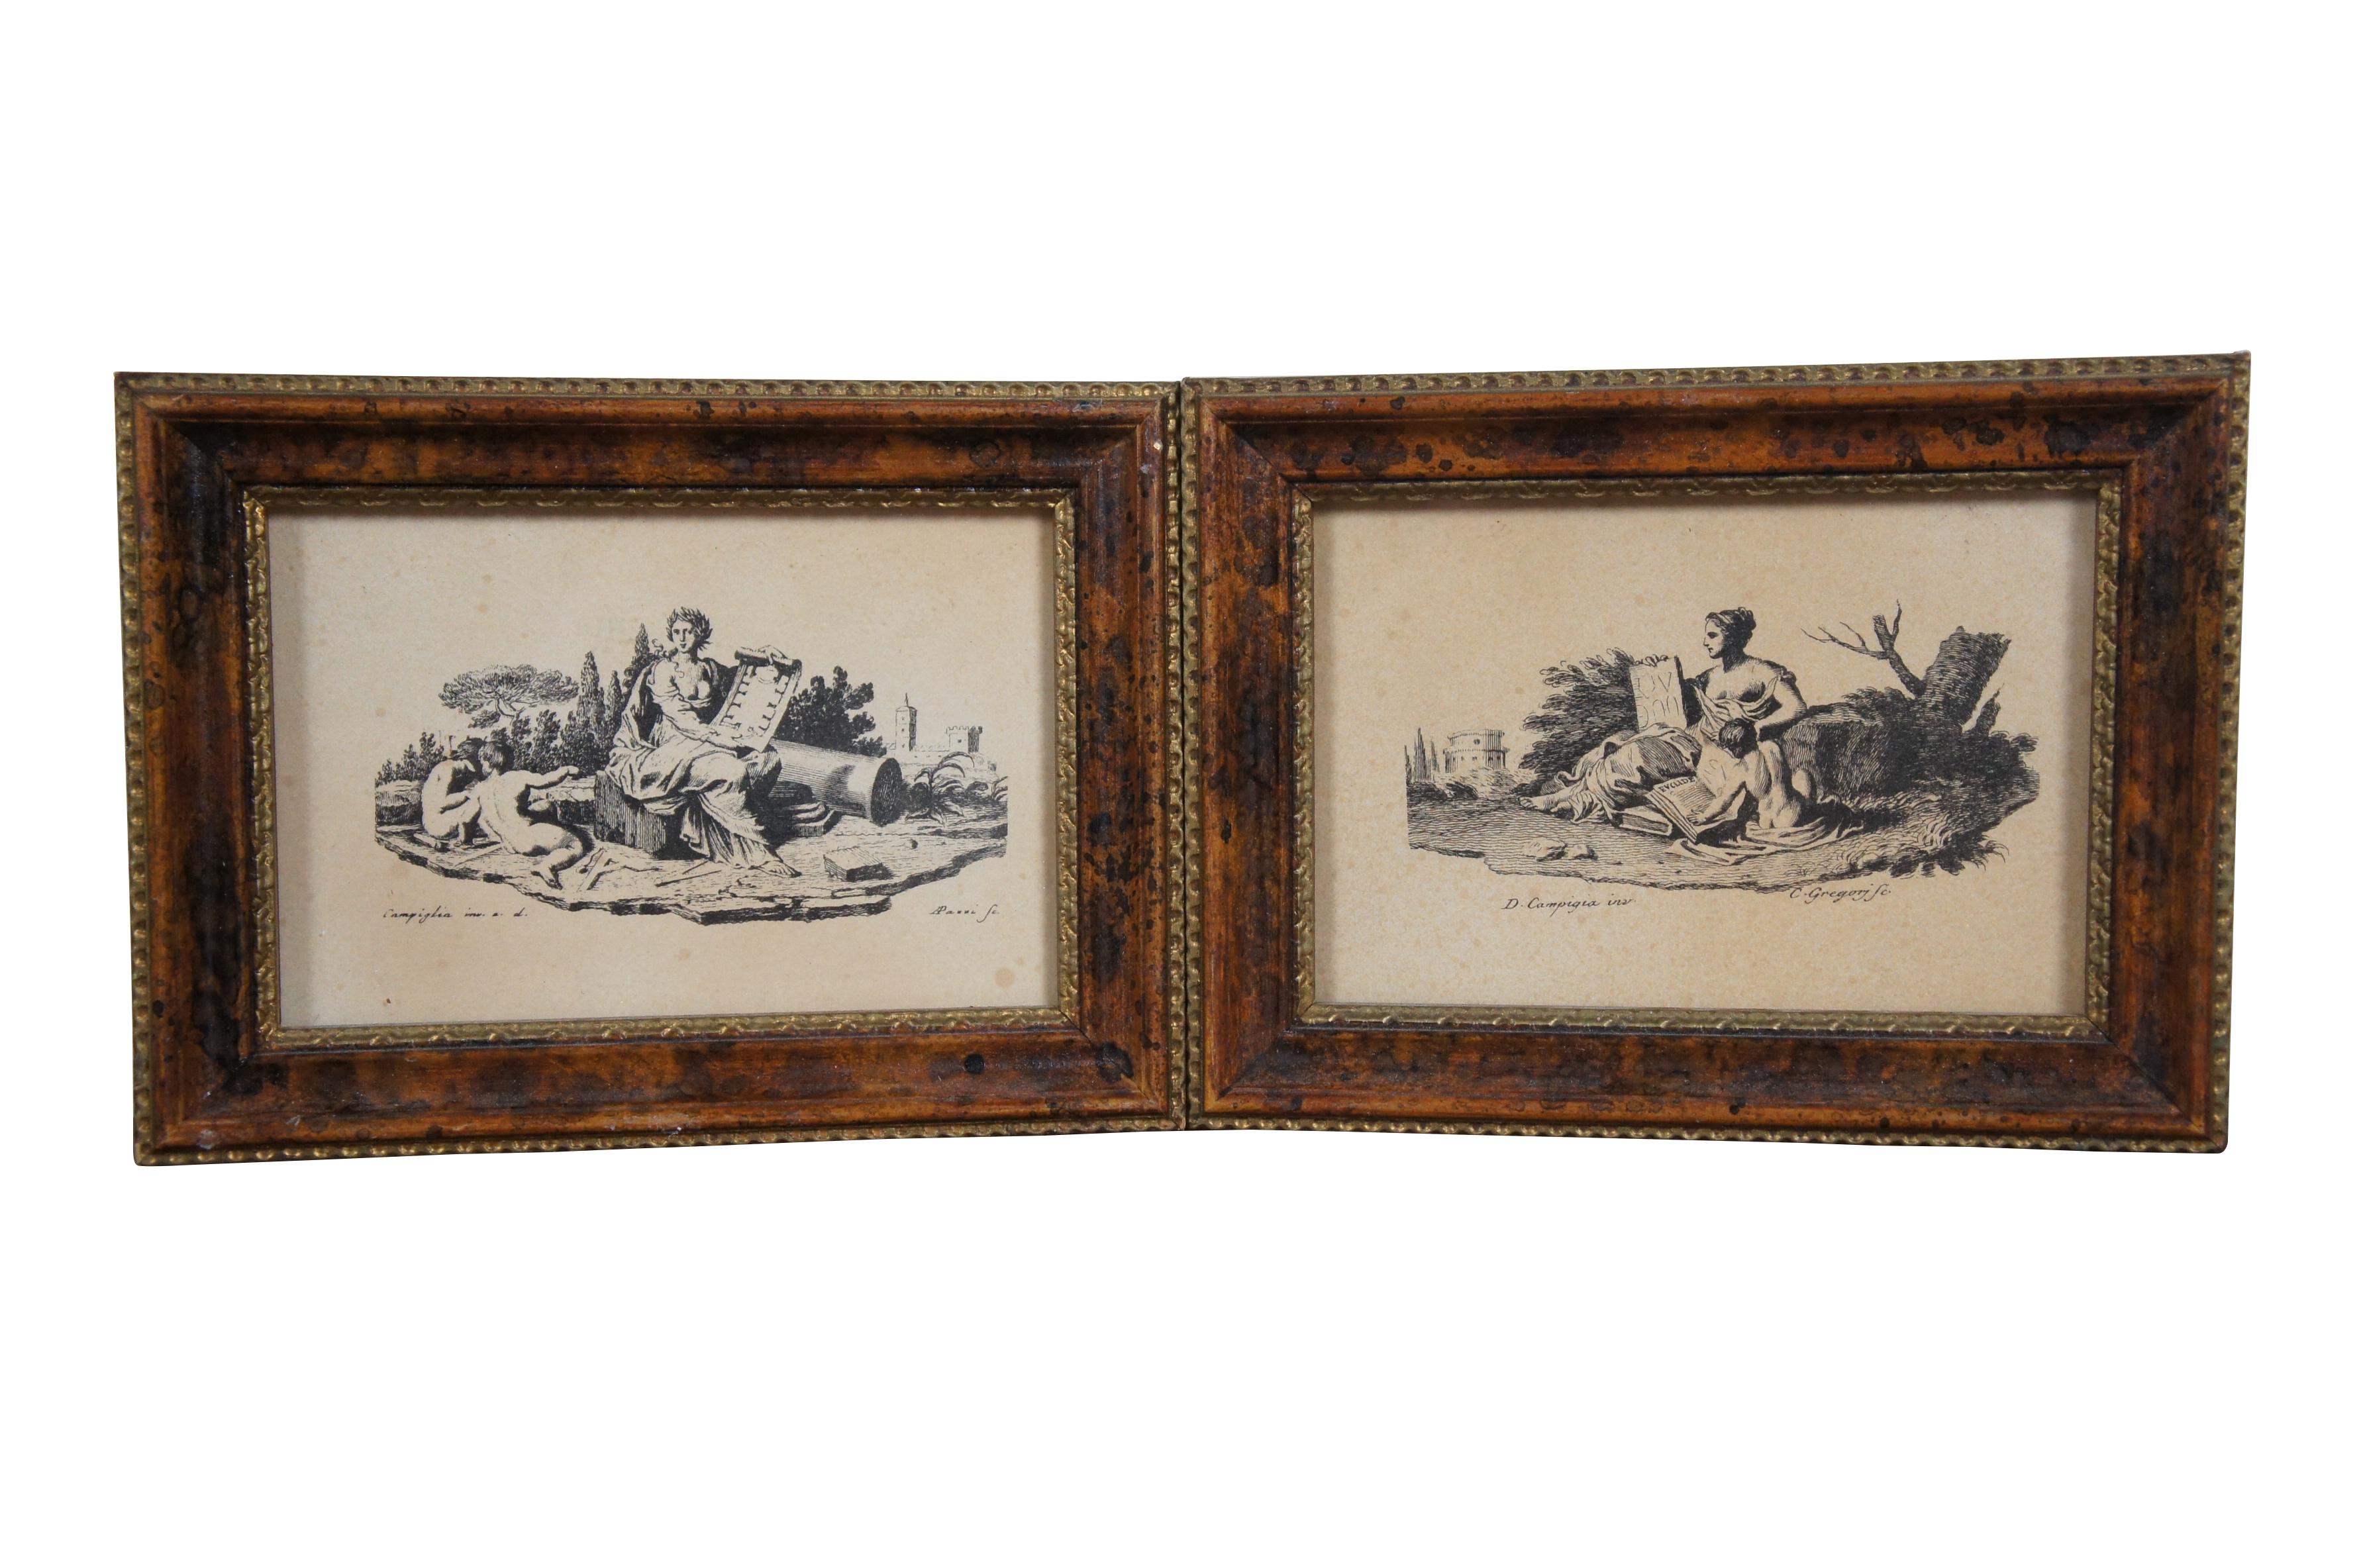 Set of 3 late 19th-early 20th century neoclassical engravings after the work of Giovanni Domenico Campiglia. Prints feature women / children / puttis / cherub figures in classical Roman / Italian landscapes and ruins. Mottled antiqued frame with